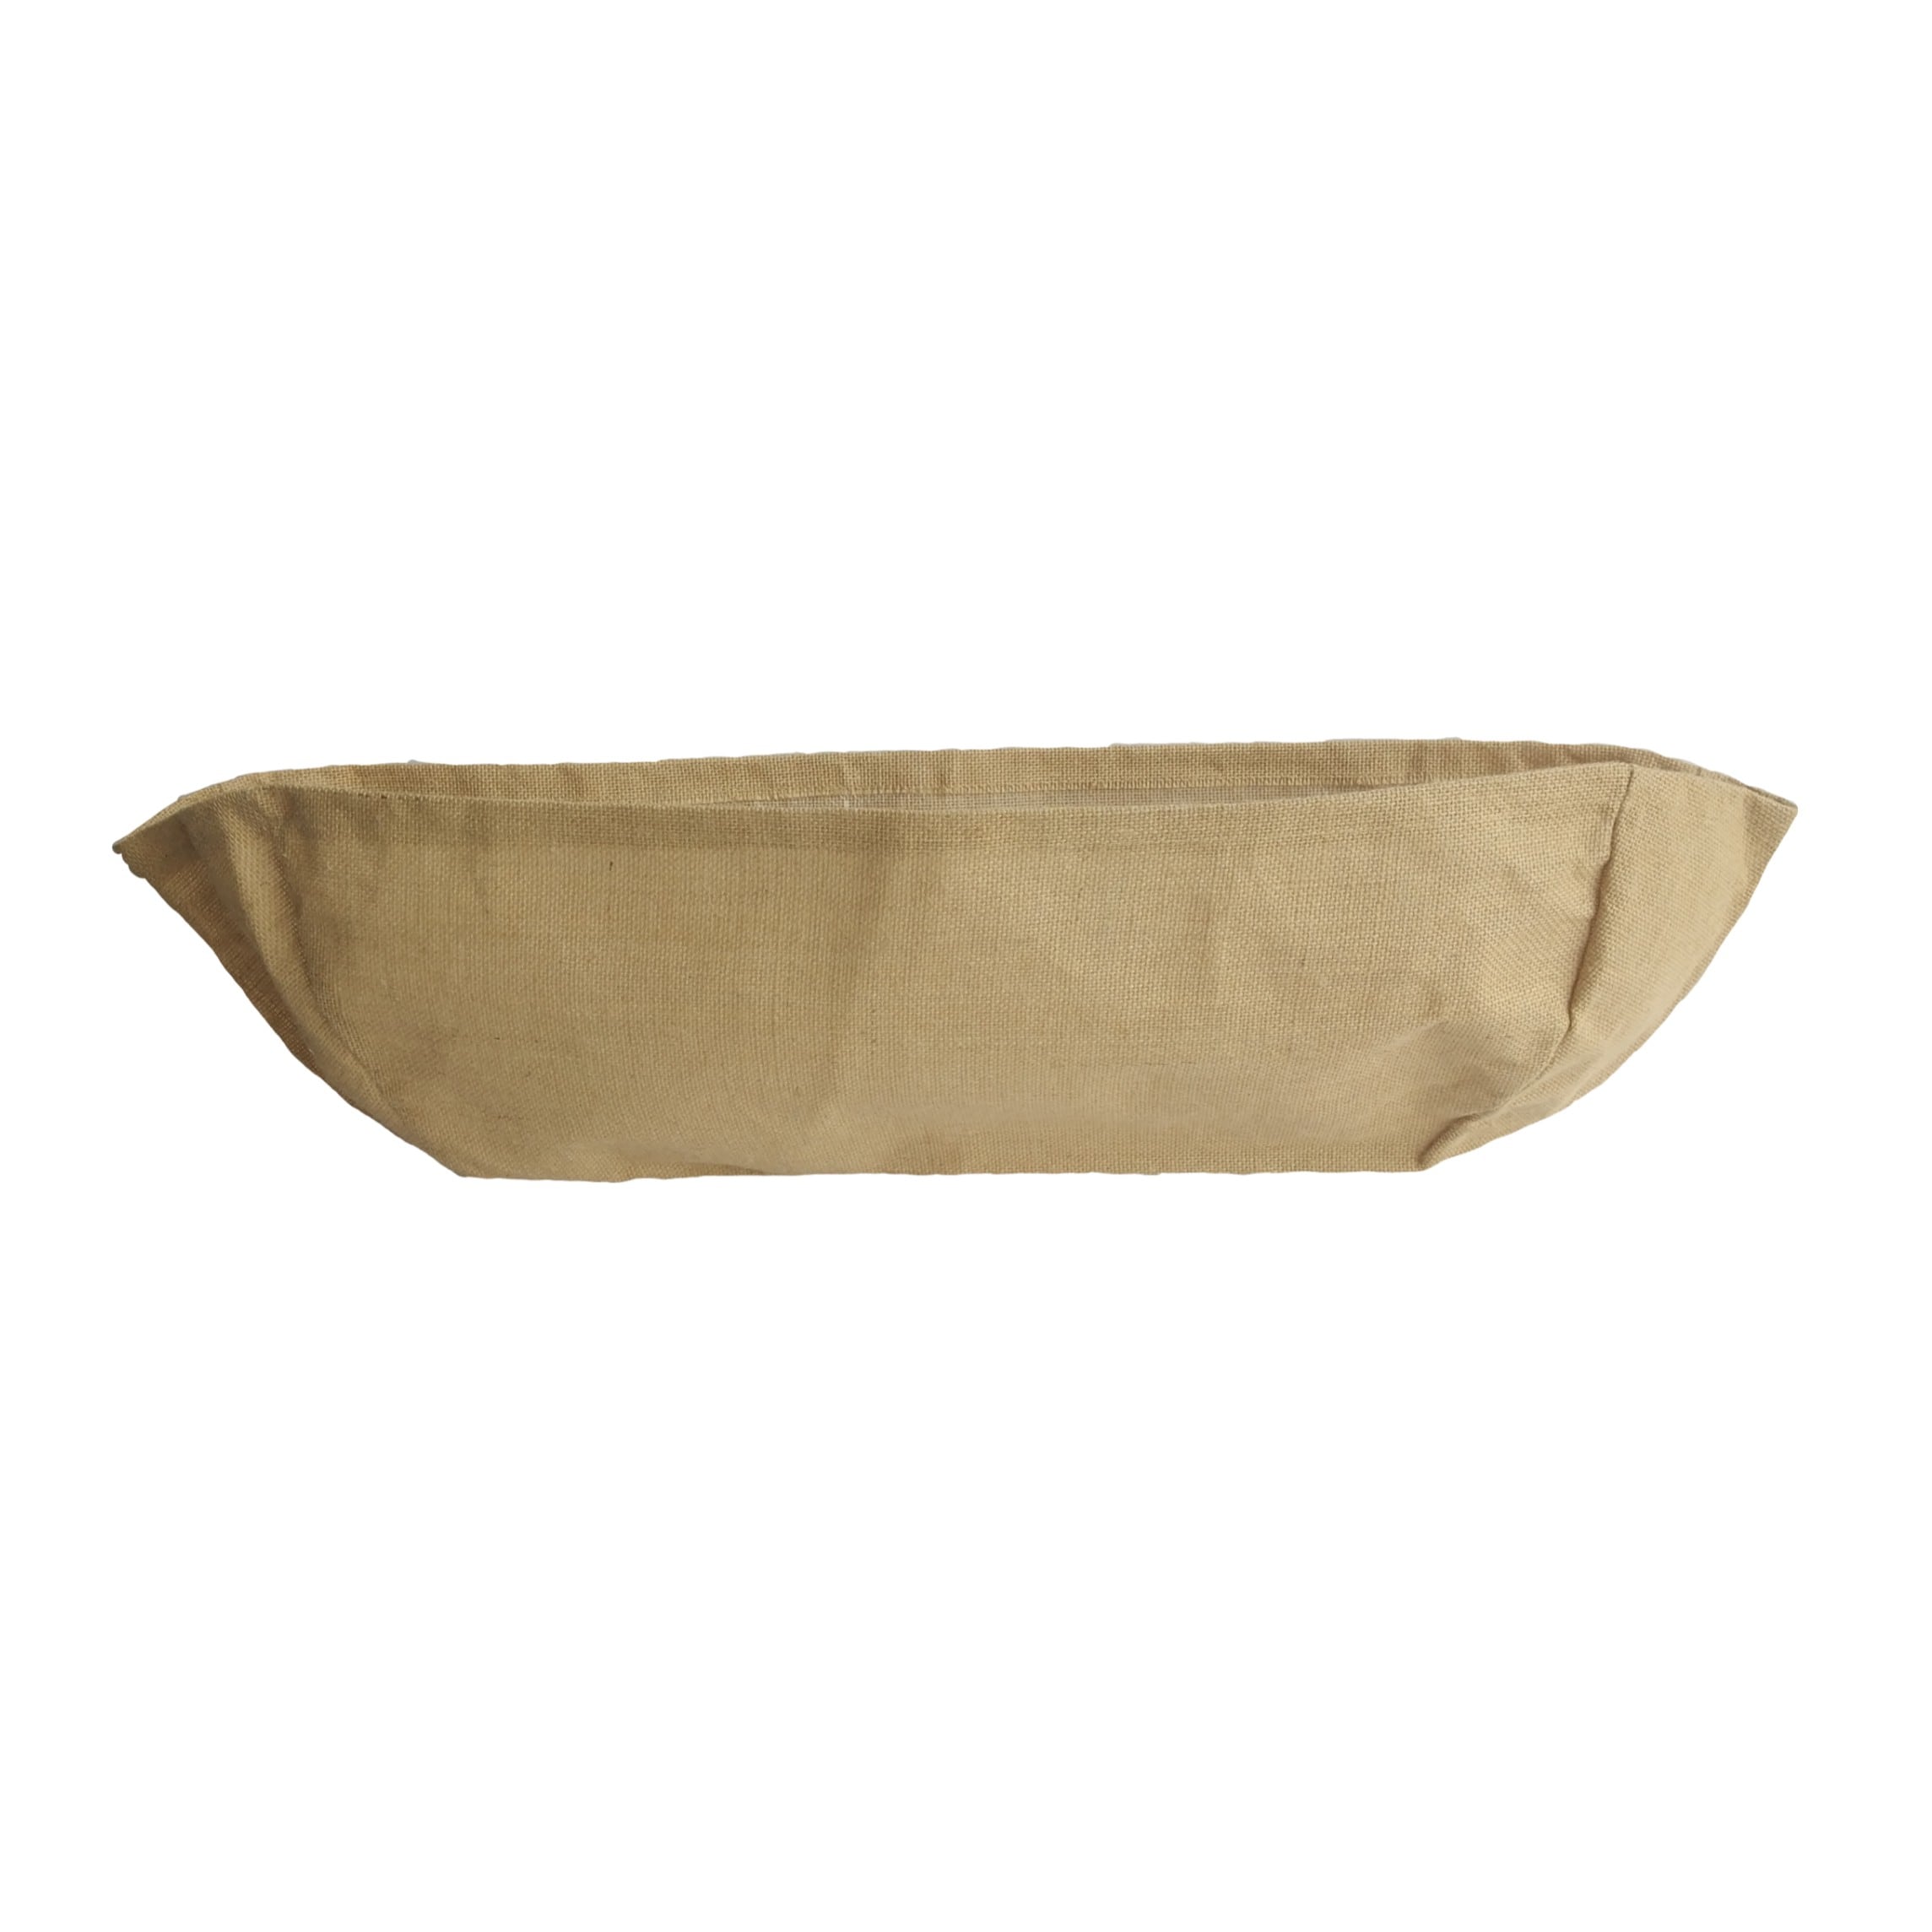 30" Burlap Replacement Trough Plant Liners Hanging Basket Liner Pack of 2 